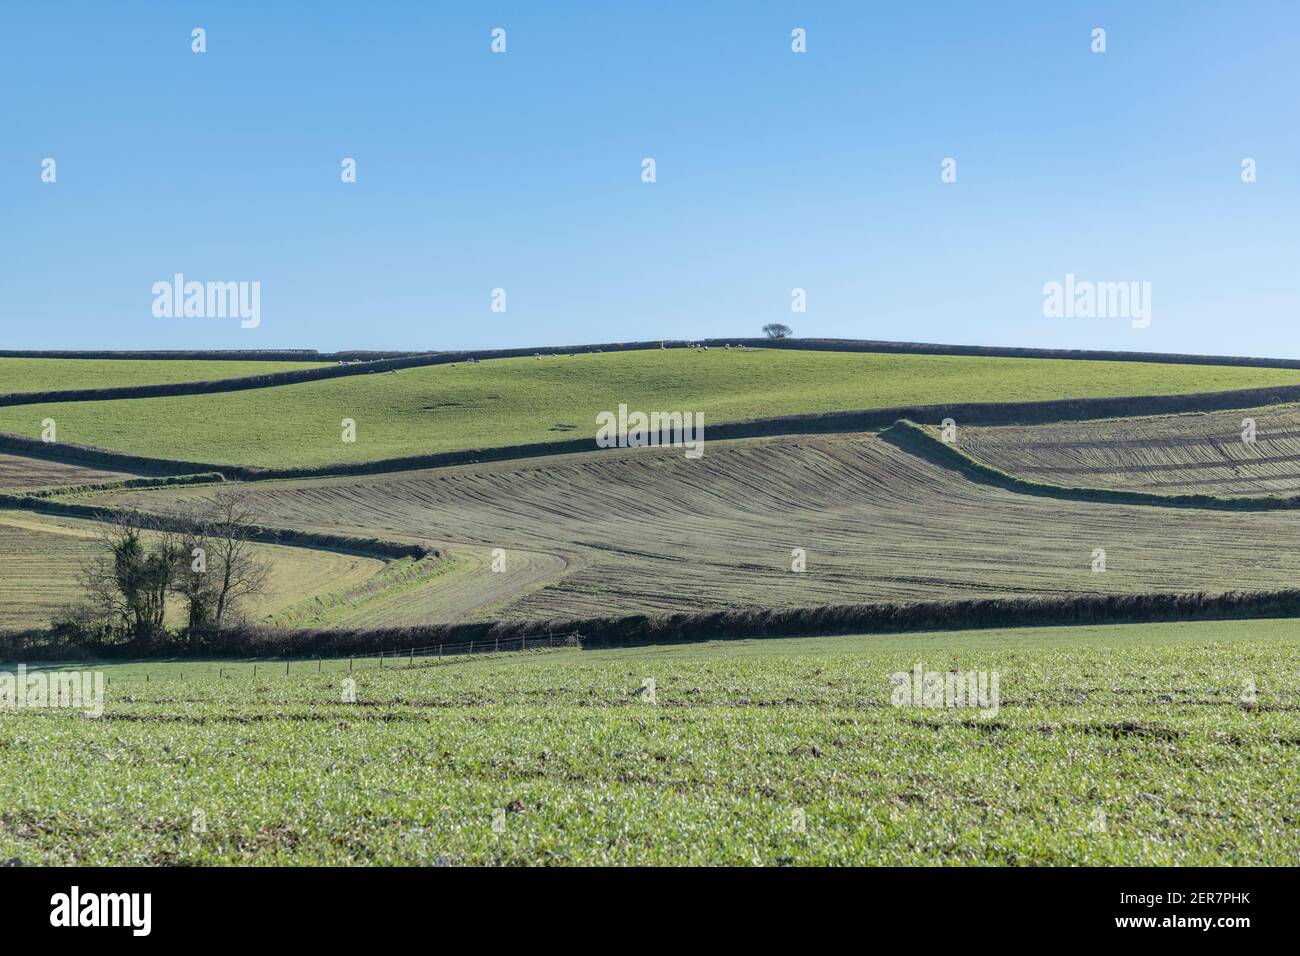 Sunny 16:9 landscape of hedgerow field boundaries seen from distant vantage point. For UK field systems, Cornwall fields, Cornish farms, zig-zags. Stock Photo